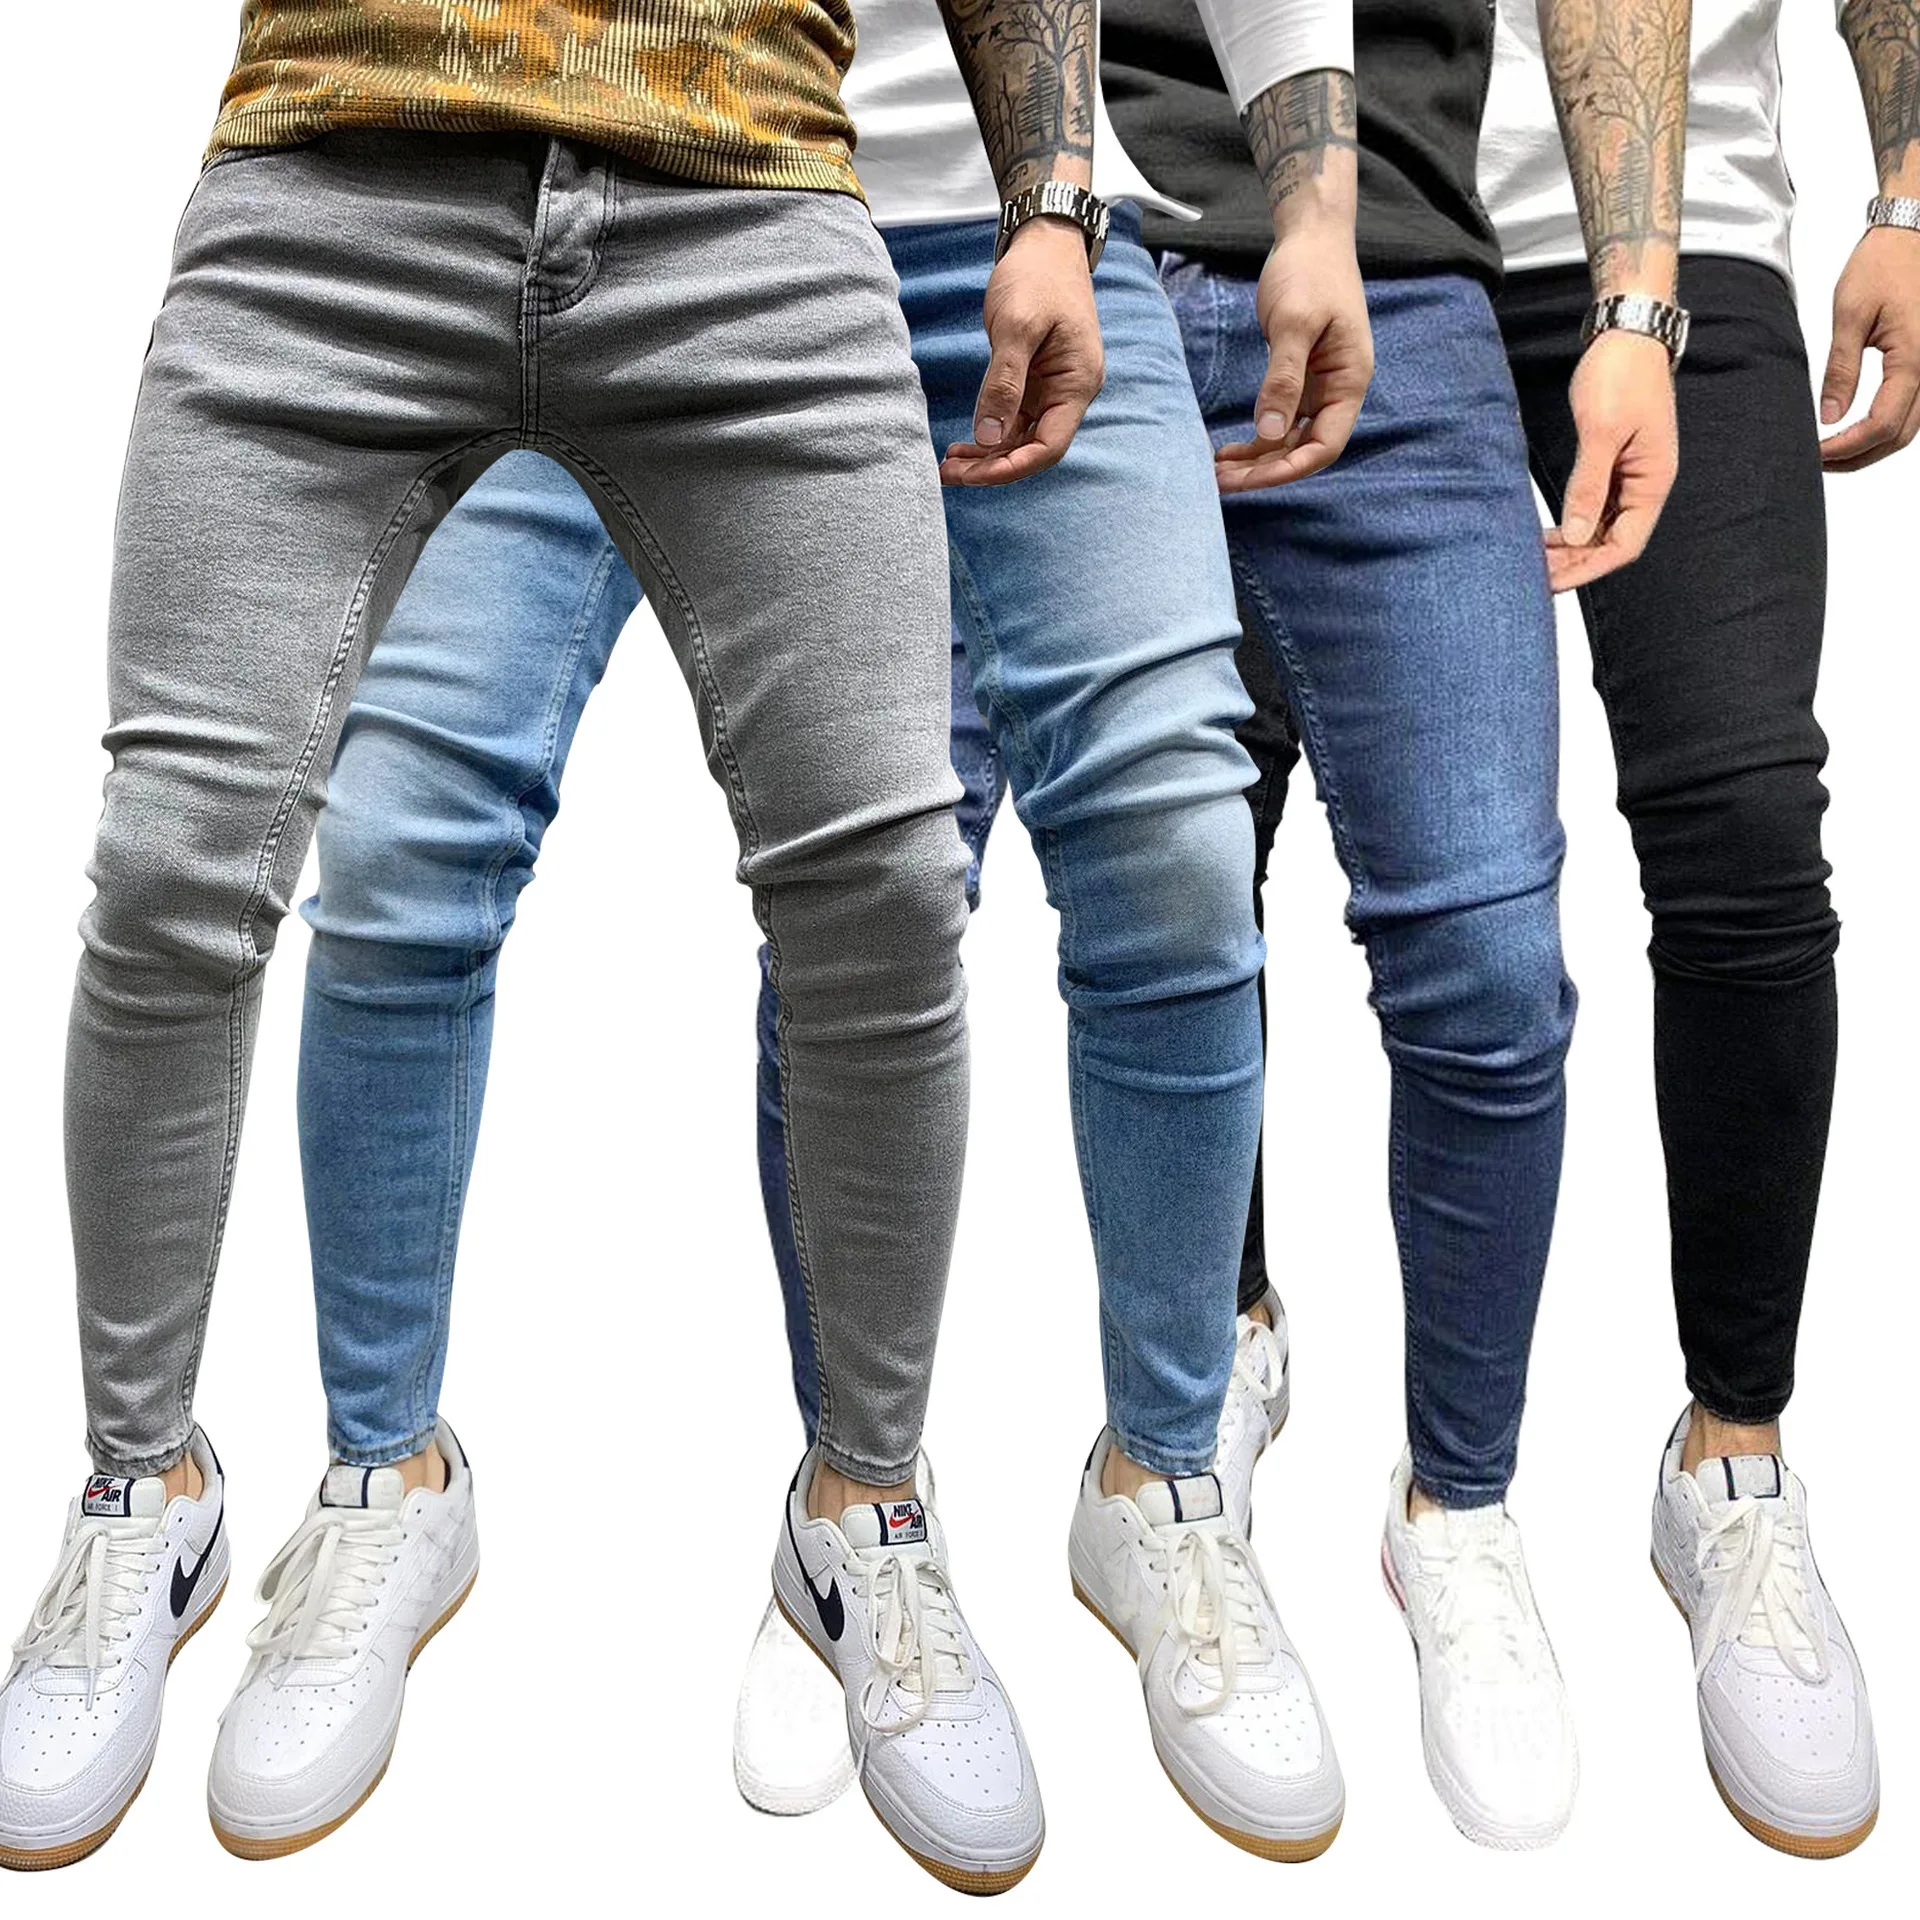 Kakan - High-quality Men's Elastic Tight-fitting Small-foot Men's Jeans,  Popular New Classic Four-color Jeans K016-2050 - AliExpress